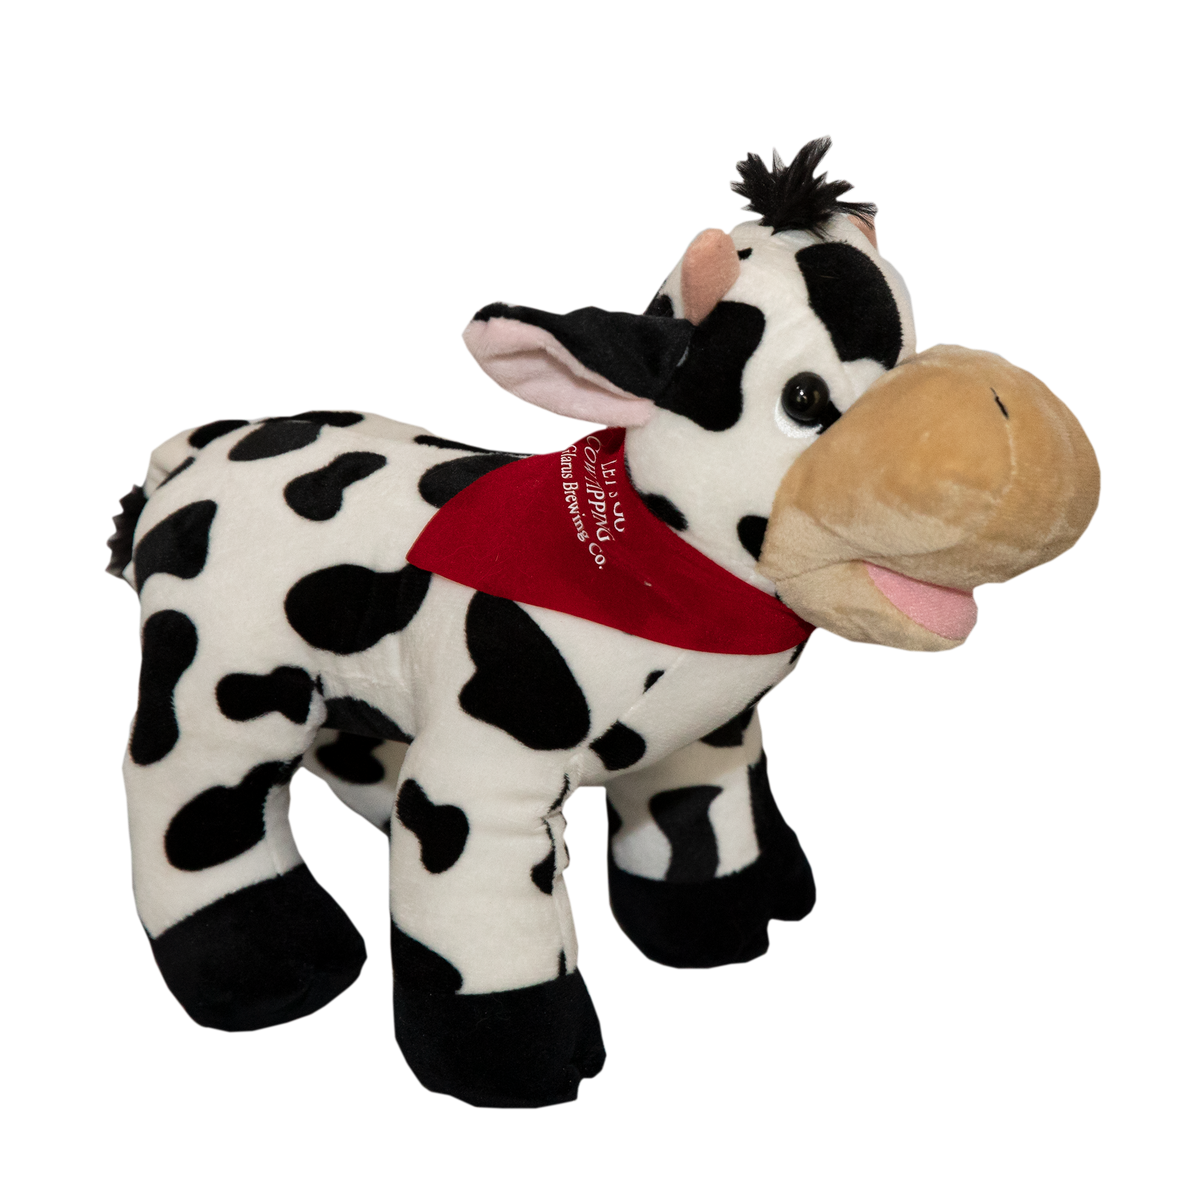 Plush stuffed black and white spotted cow toy with a red bandana.